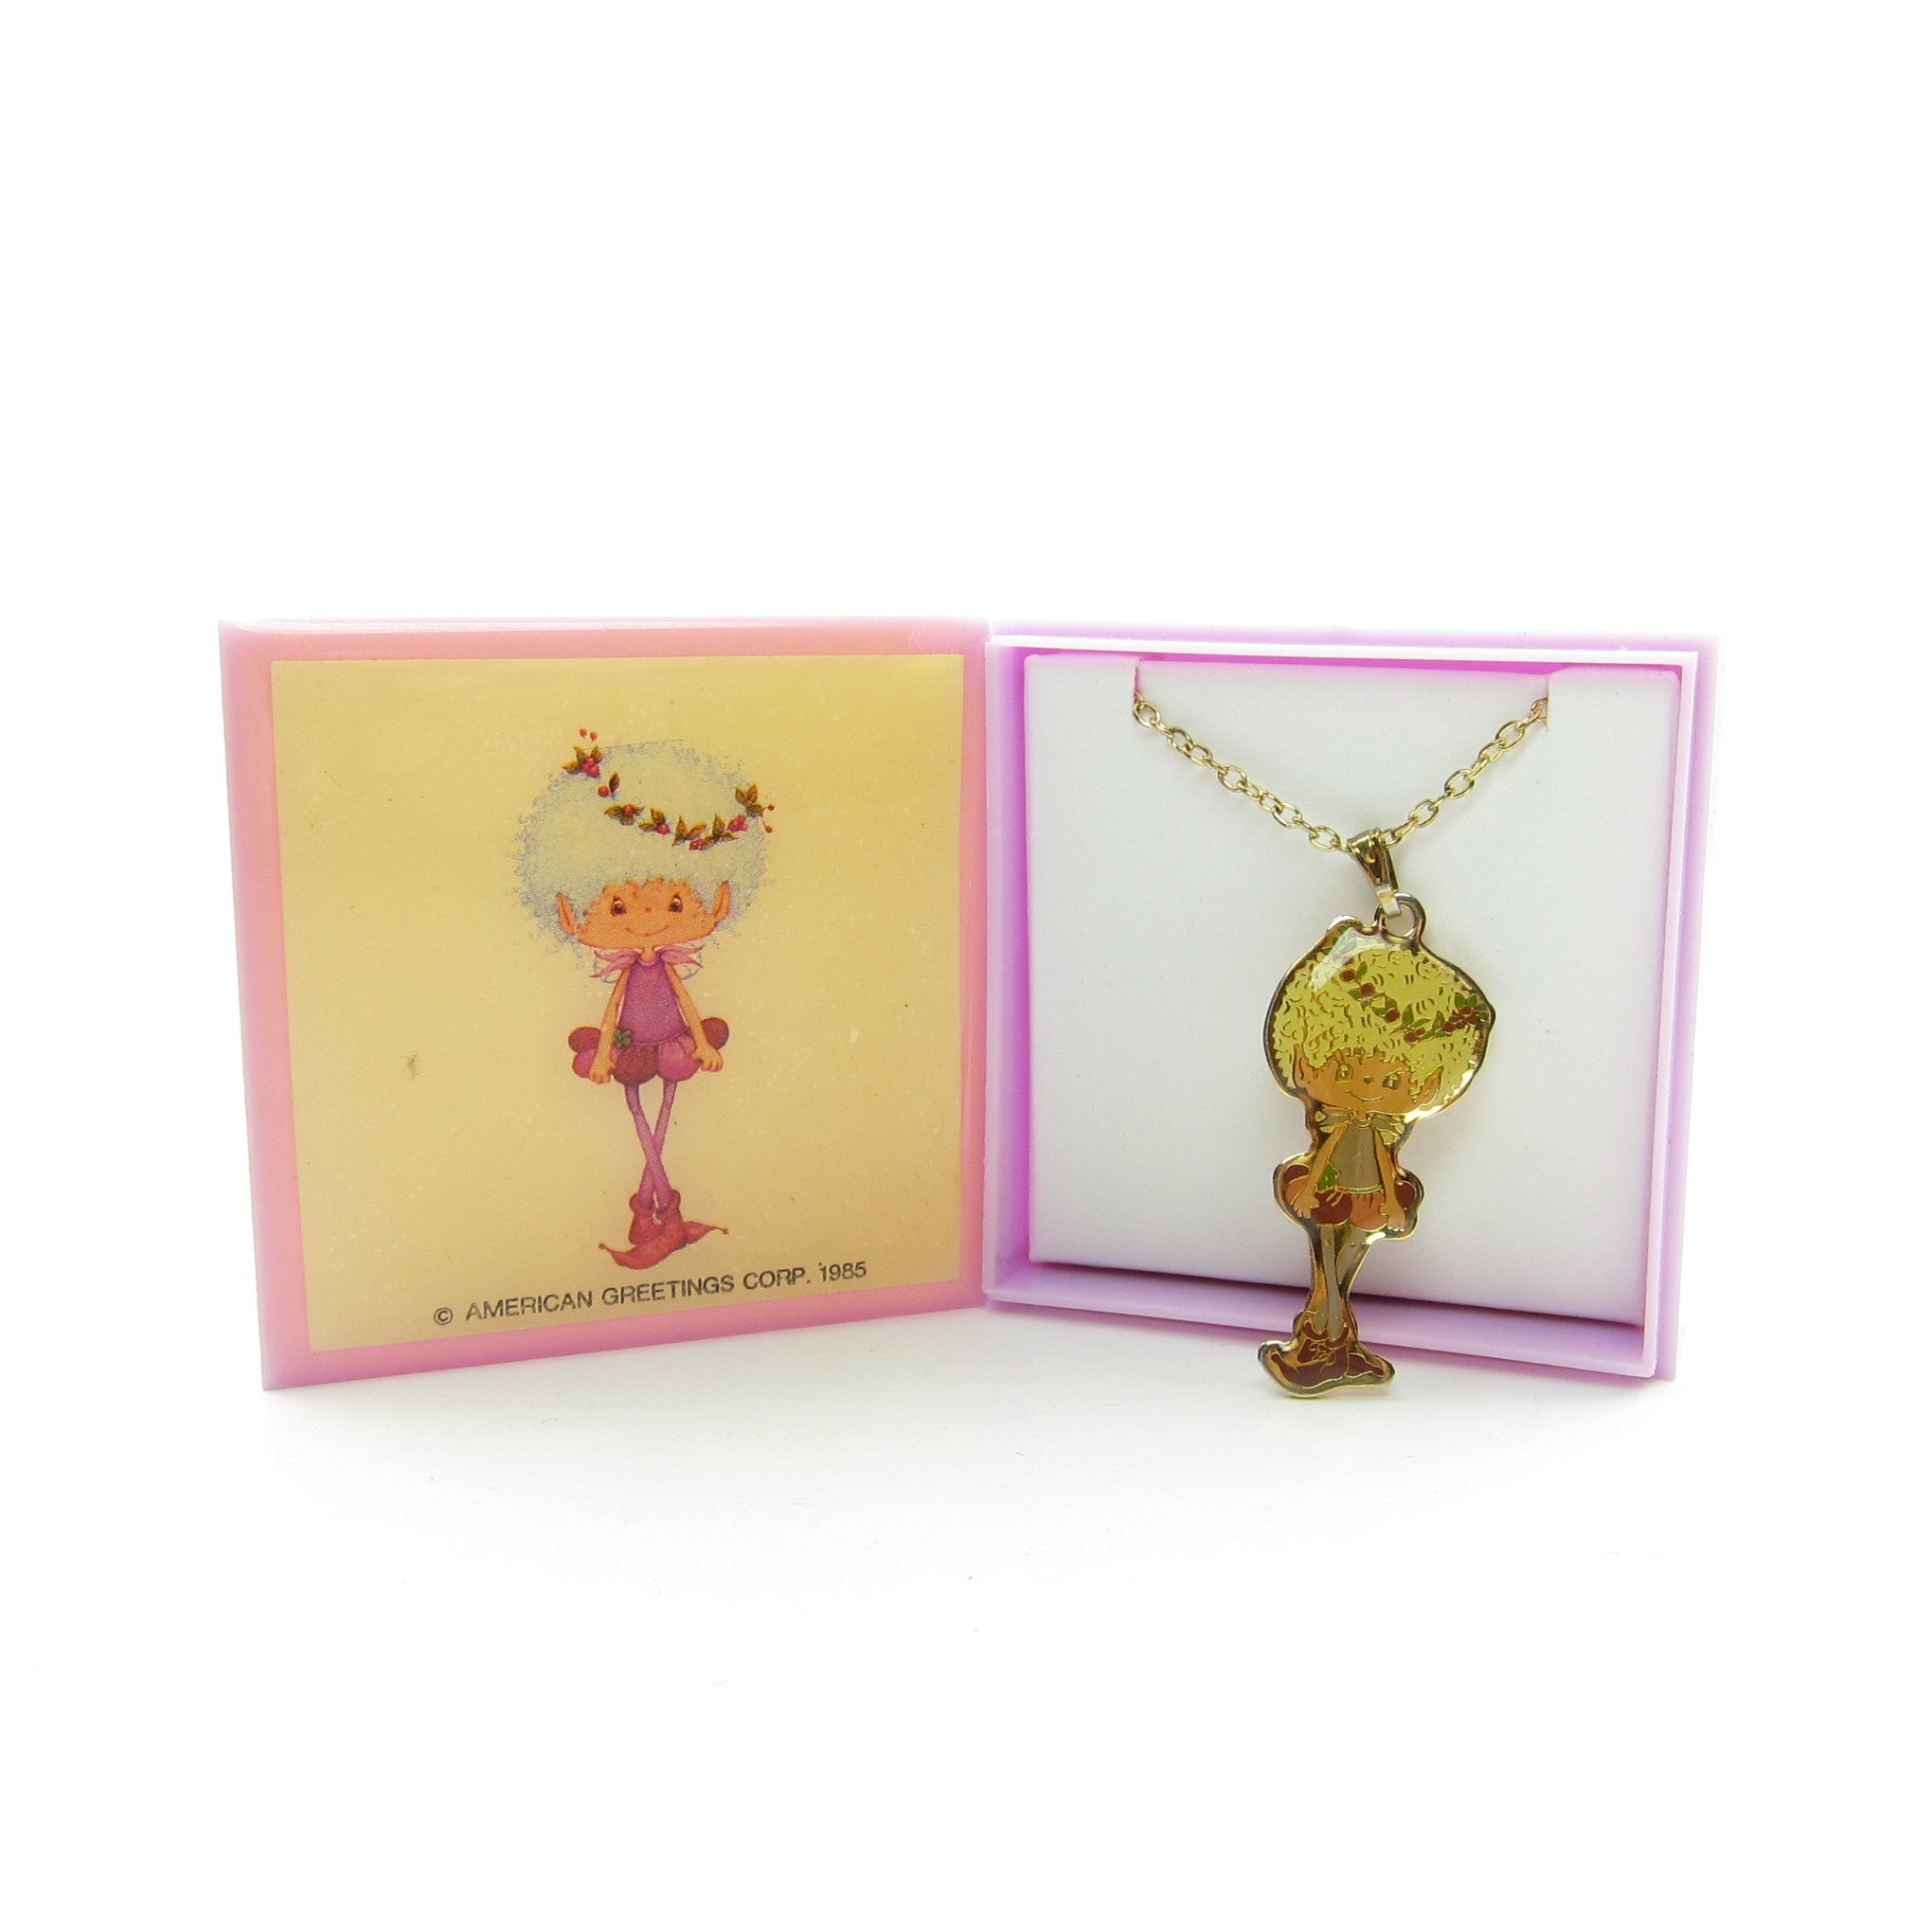 Snowdrop Herself the Elf necklace in gift box